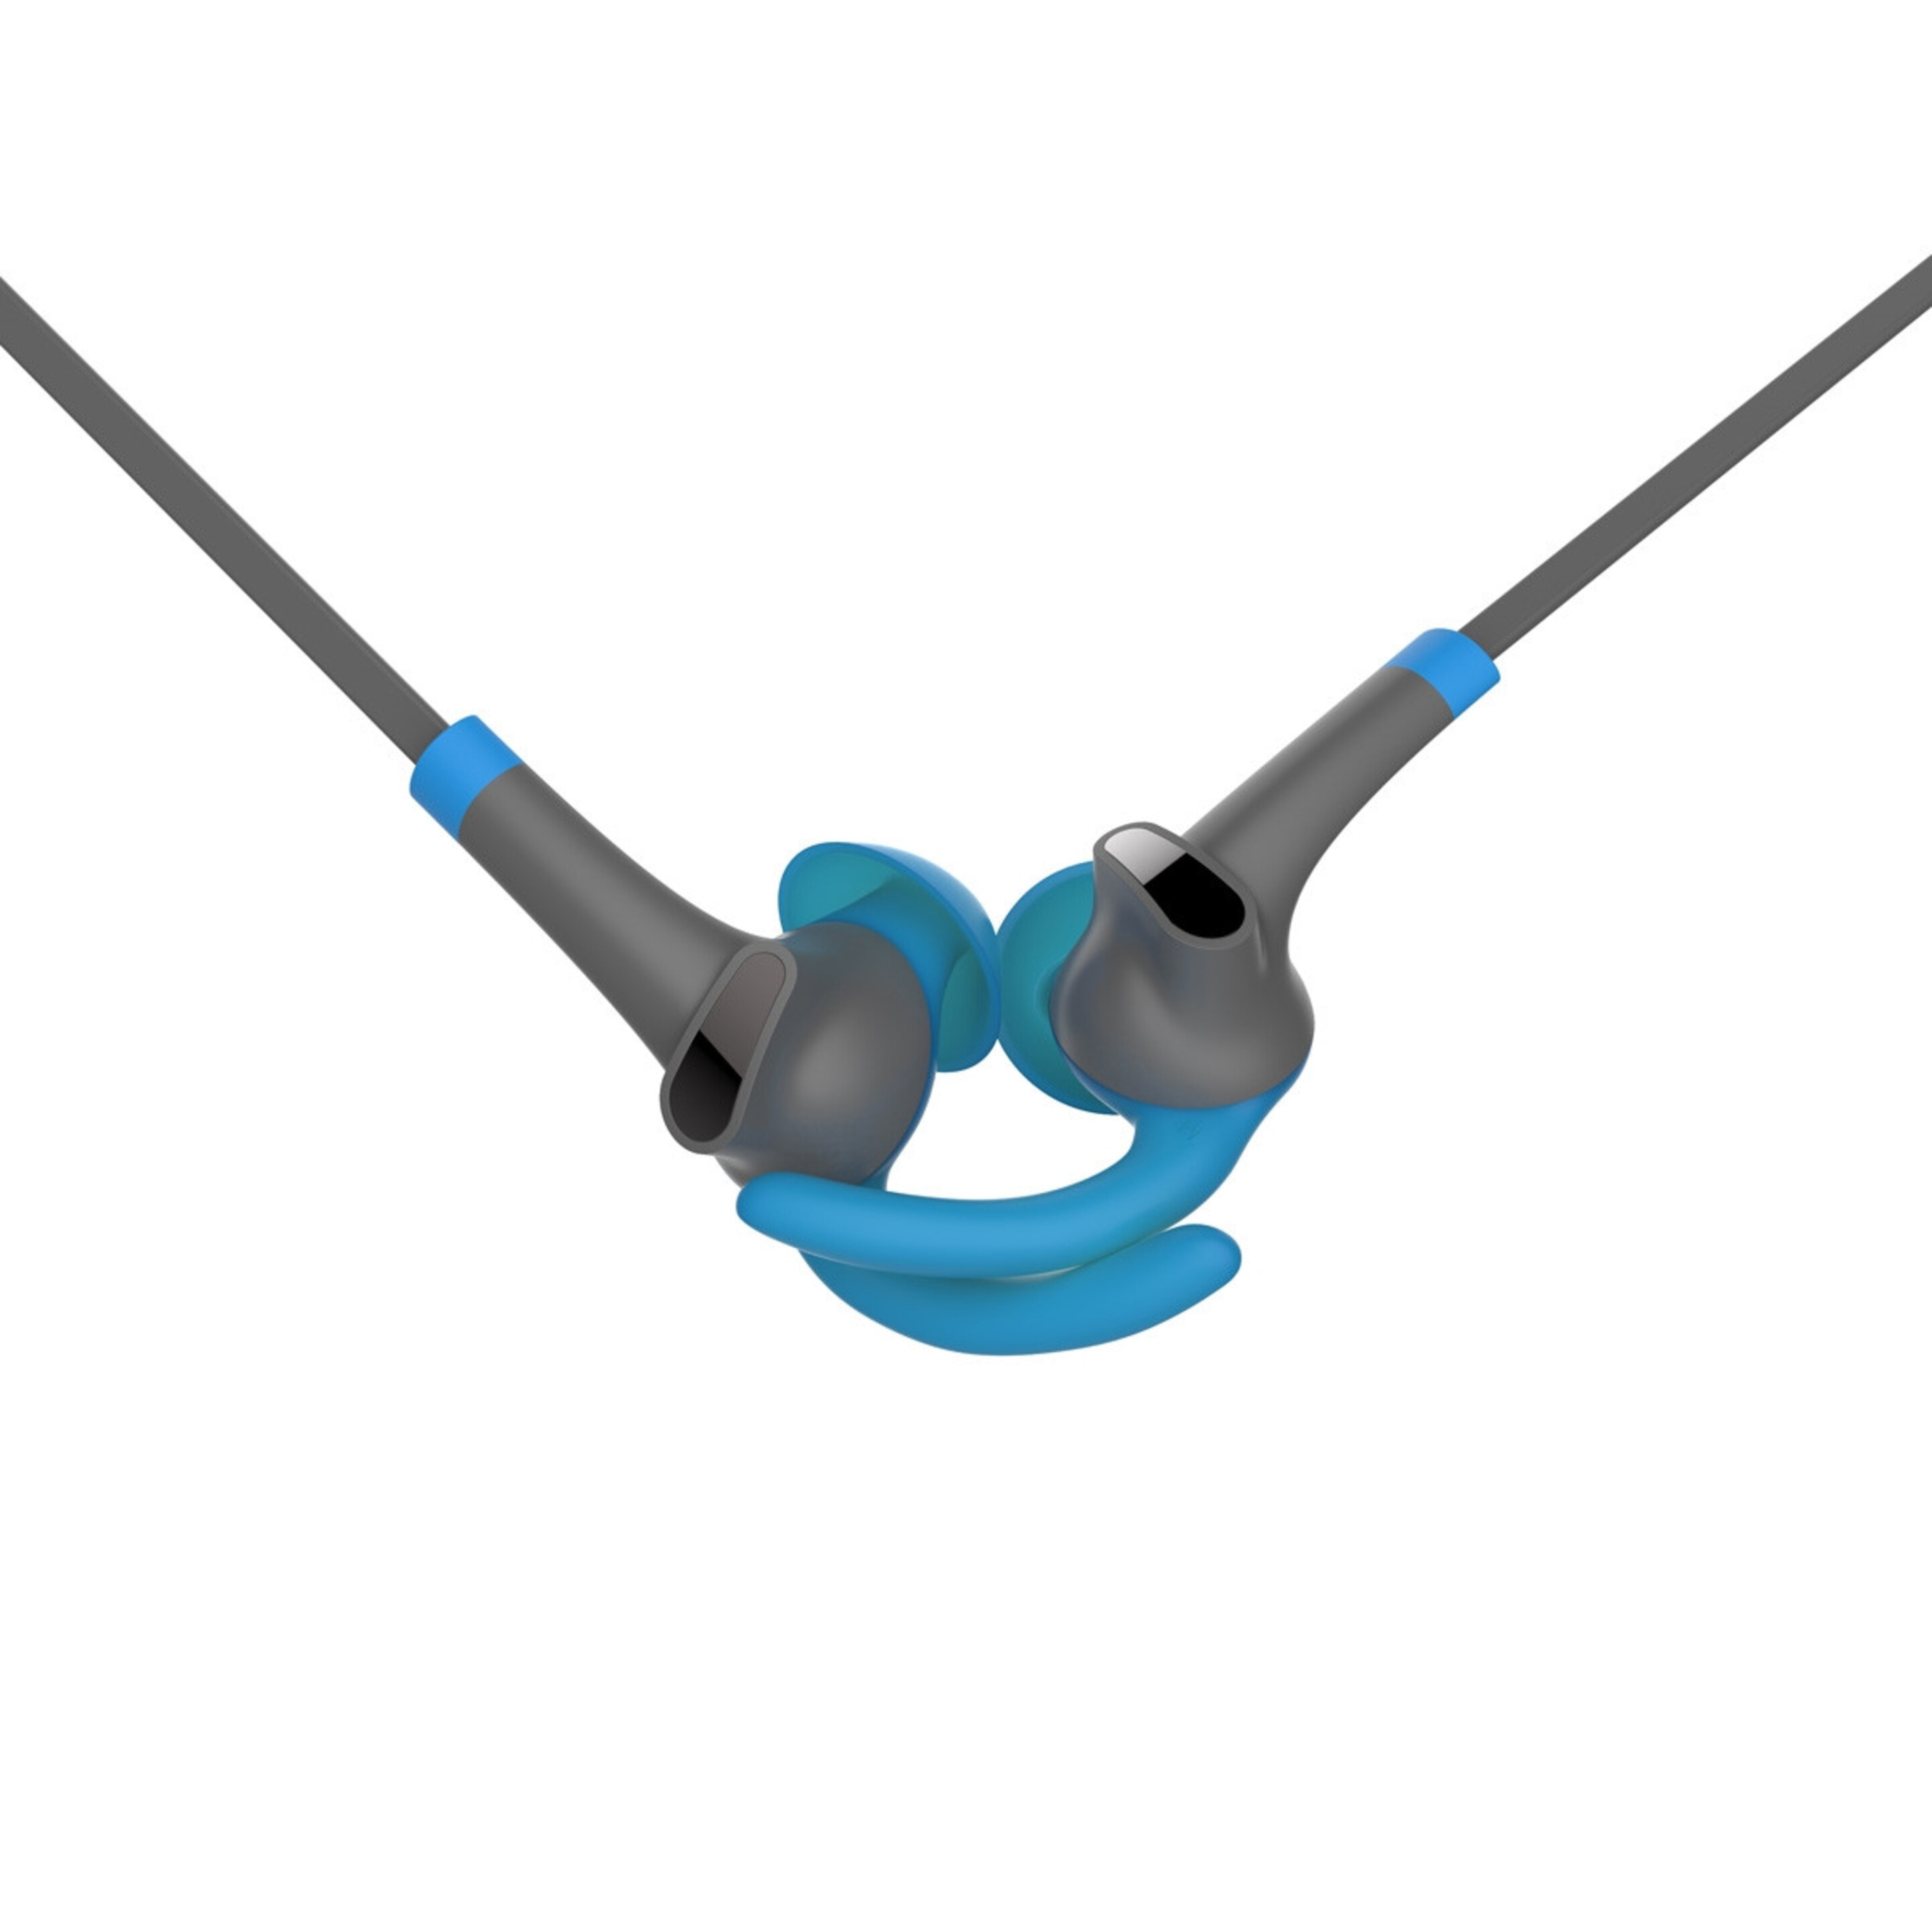 Auriculares Muvit Estéreo M1s3.5mm - azul  MKP